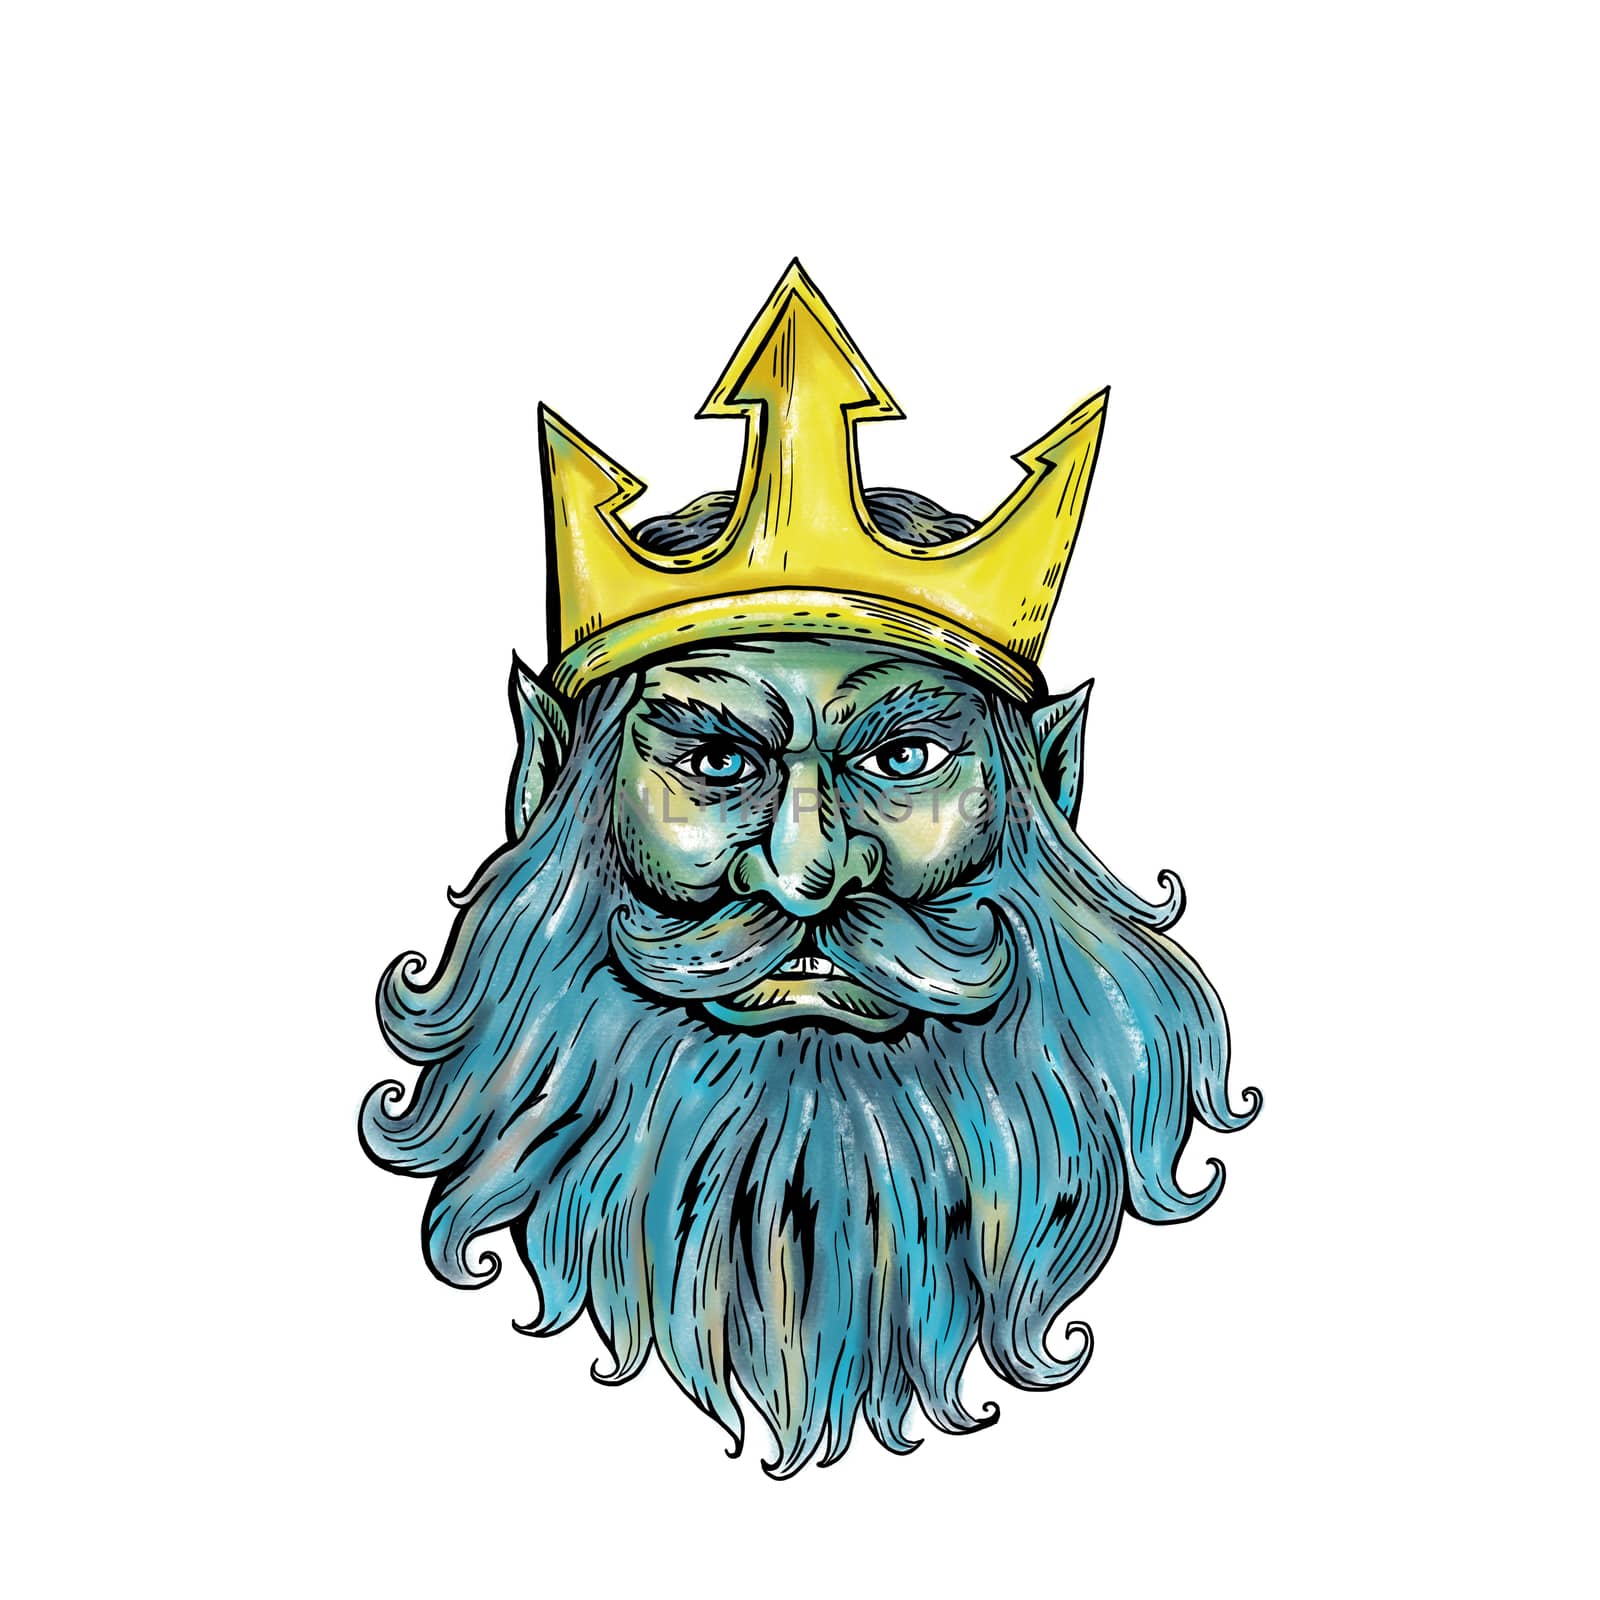 Woodcut style illustration of head of Neptune, Poseidon or Triton wearing a trident crown with flowing beard front view on isolated background.